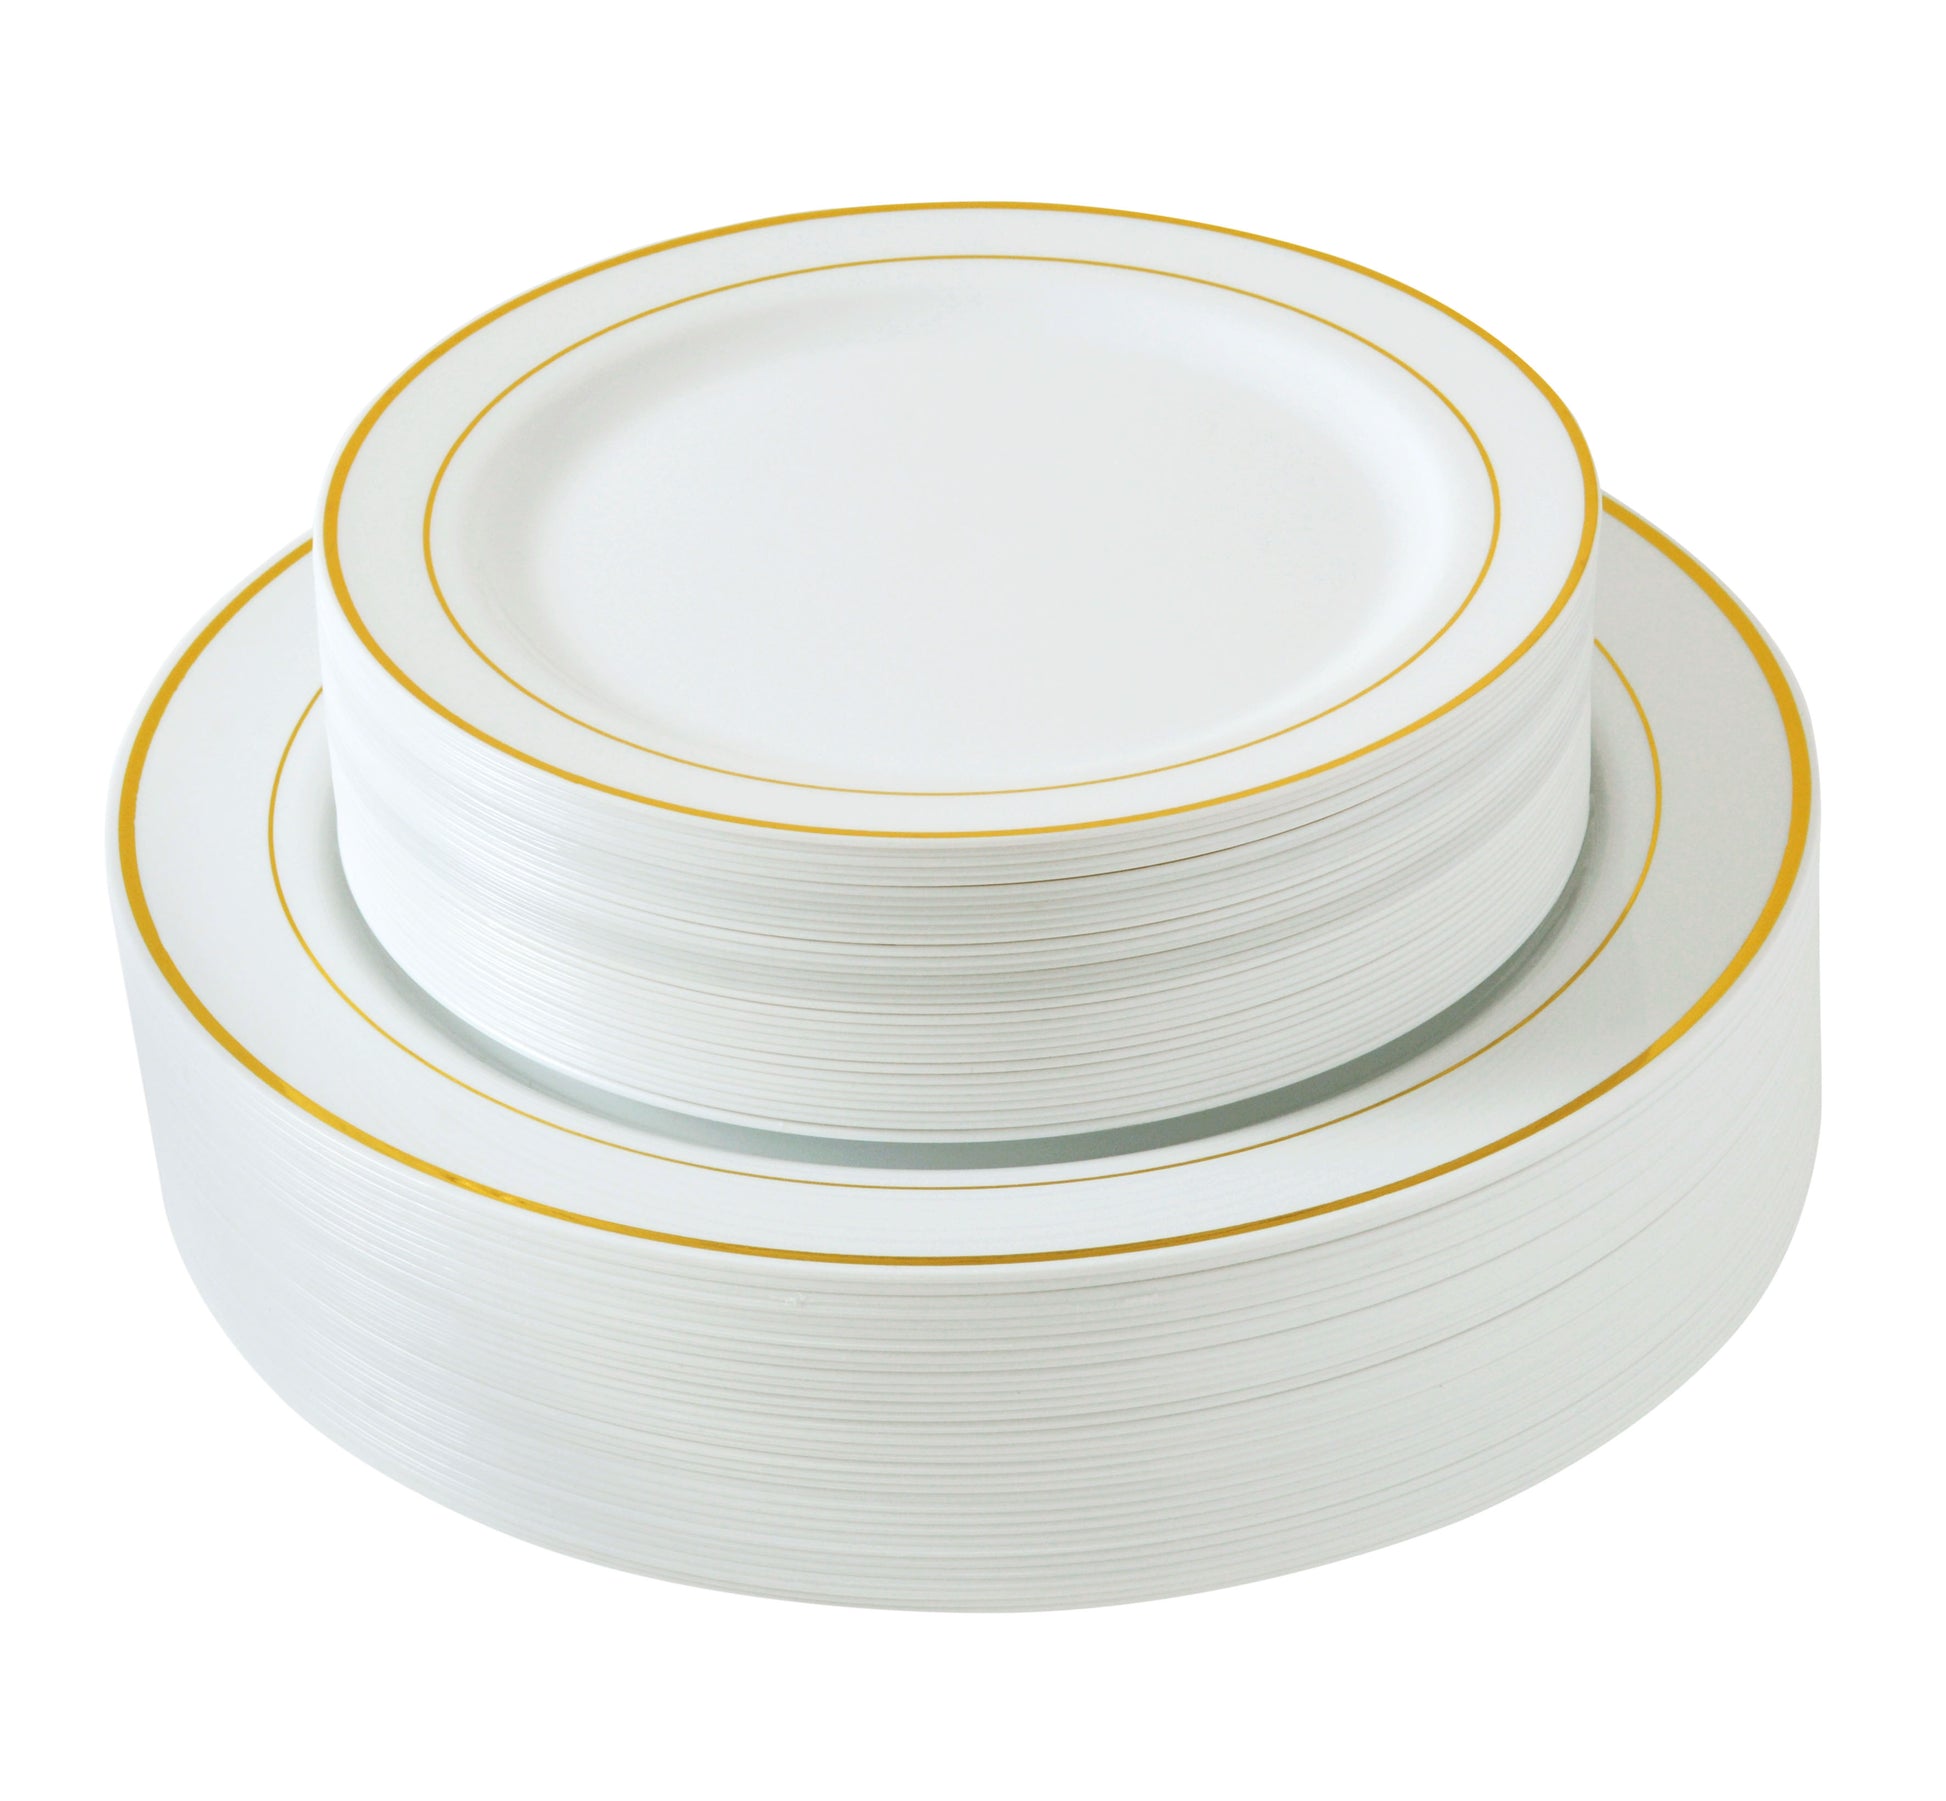 Select Settings 60 Count White with Gold Trim Plastic Plates 30 Dinner and Salad